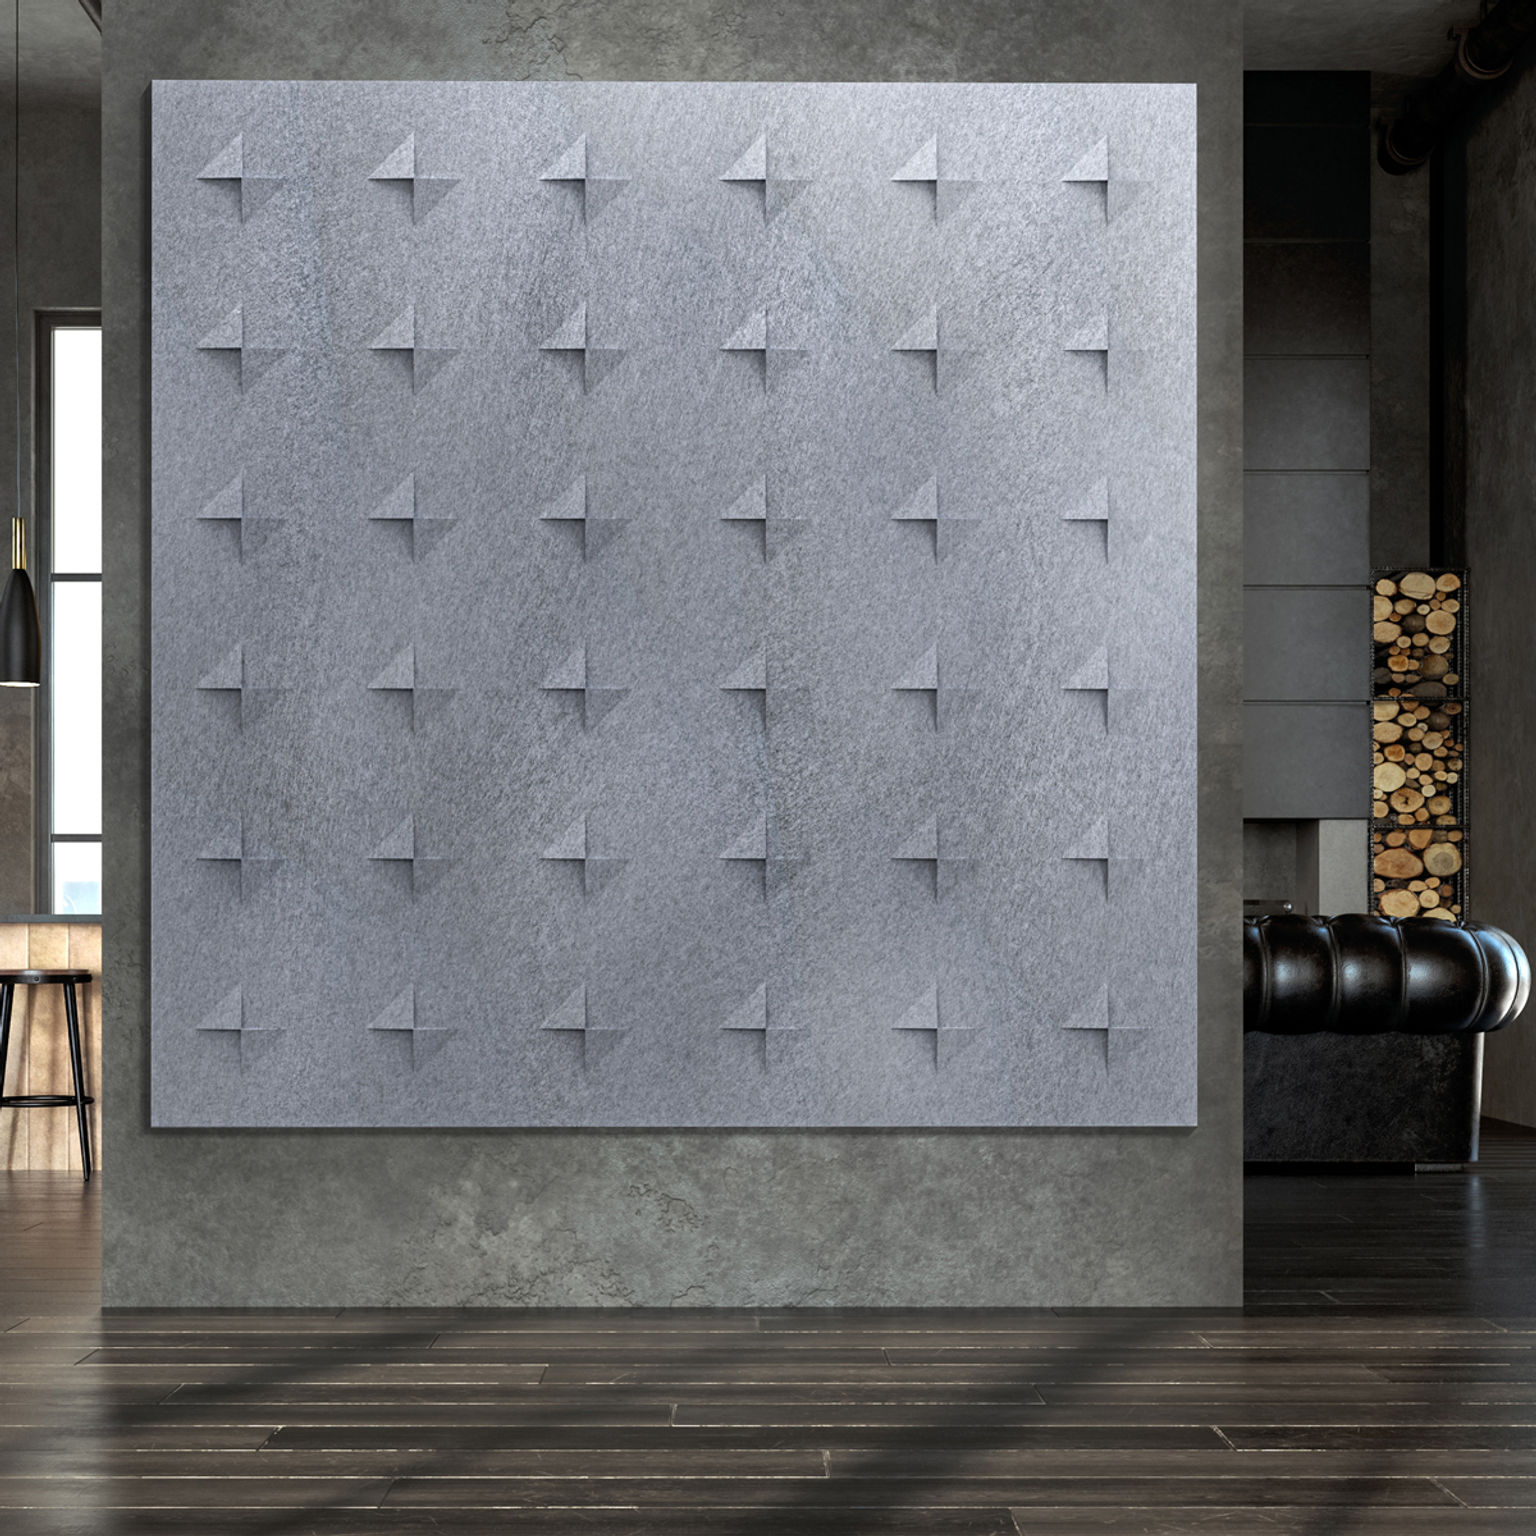 Gray acoustic panel installation with diamond-shaped push-through pattern on a concrete wall in a contemporary office hospitality lobby